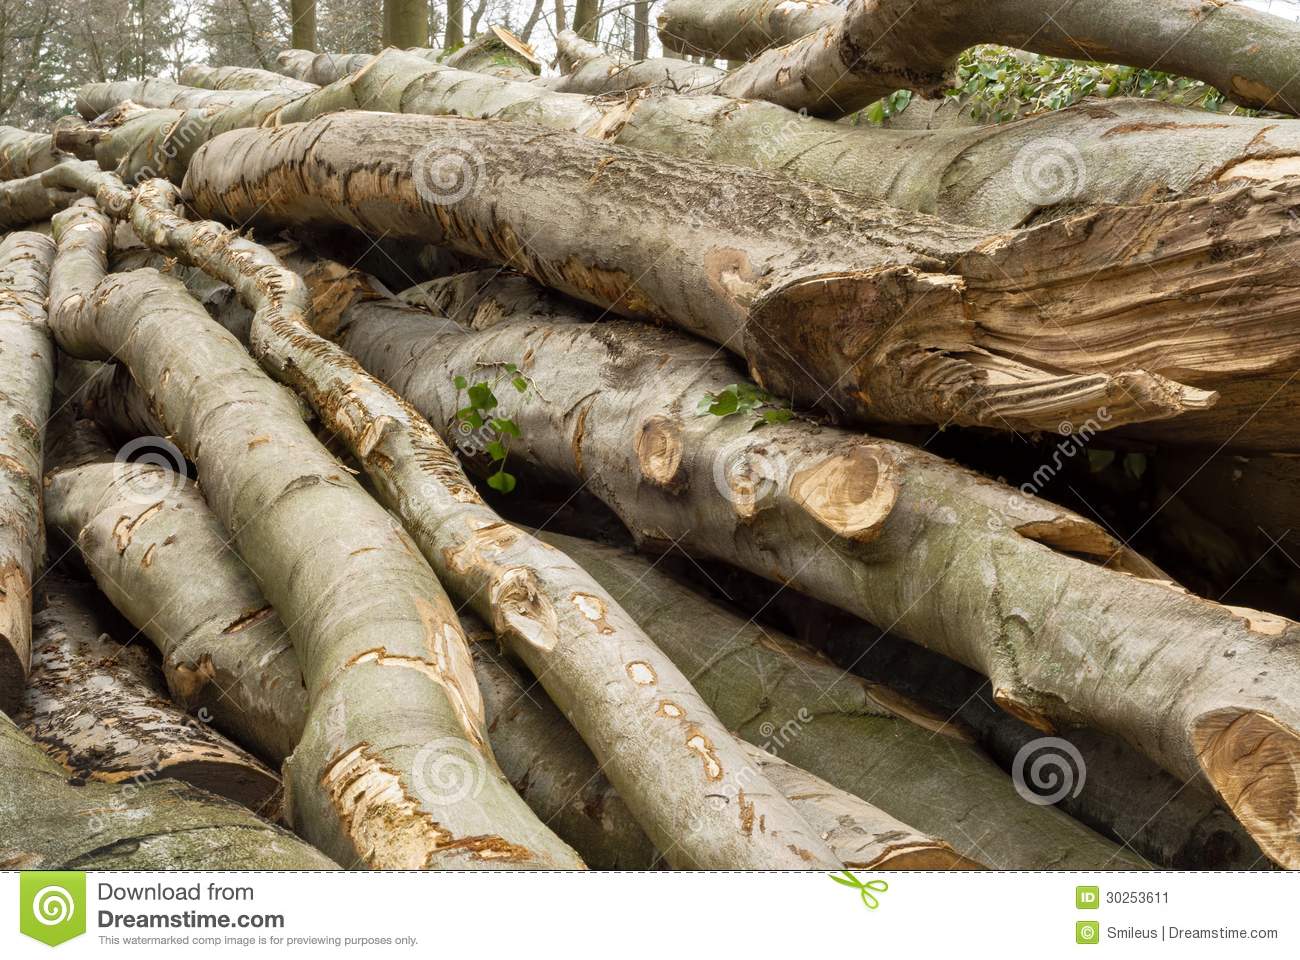 Pile Of Lumber In A Forest Shot In Soft Daylight